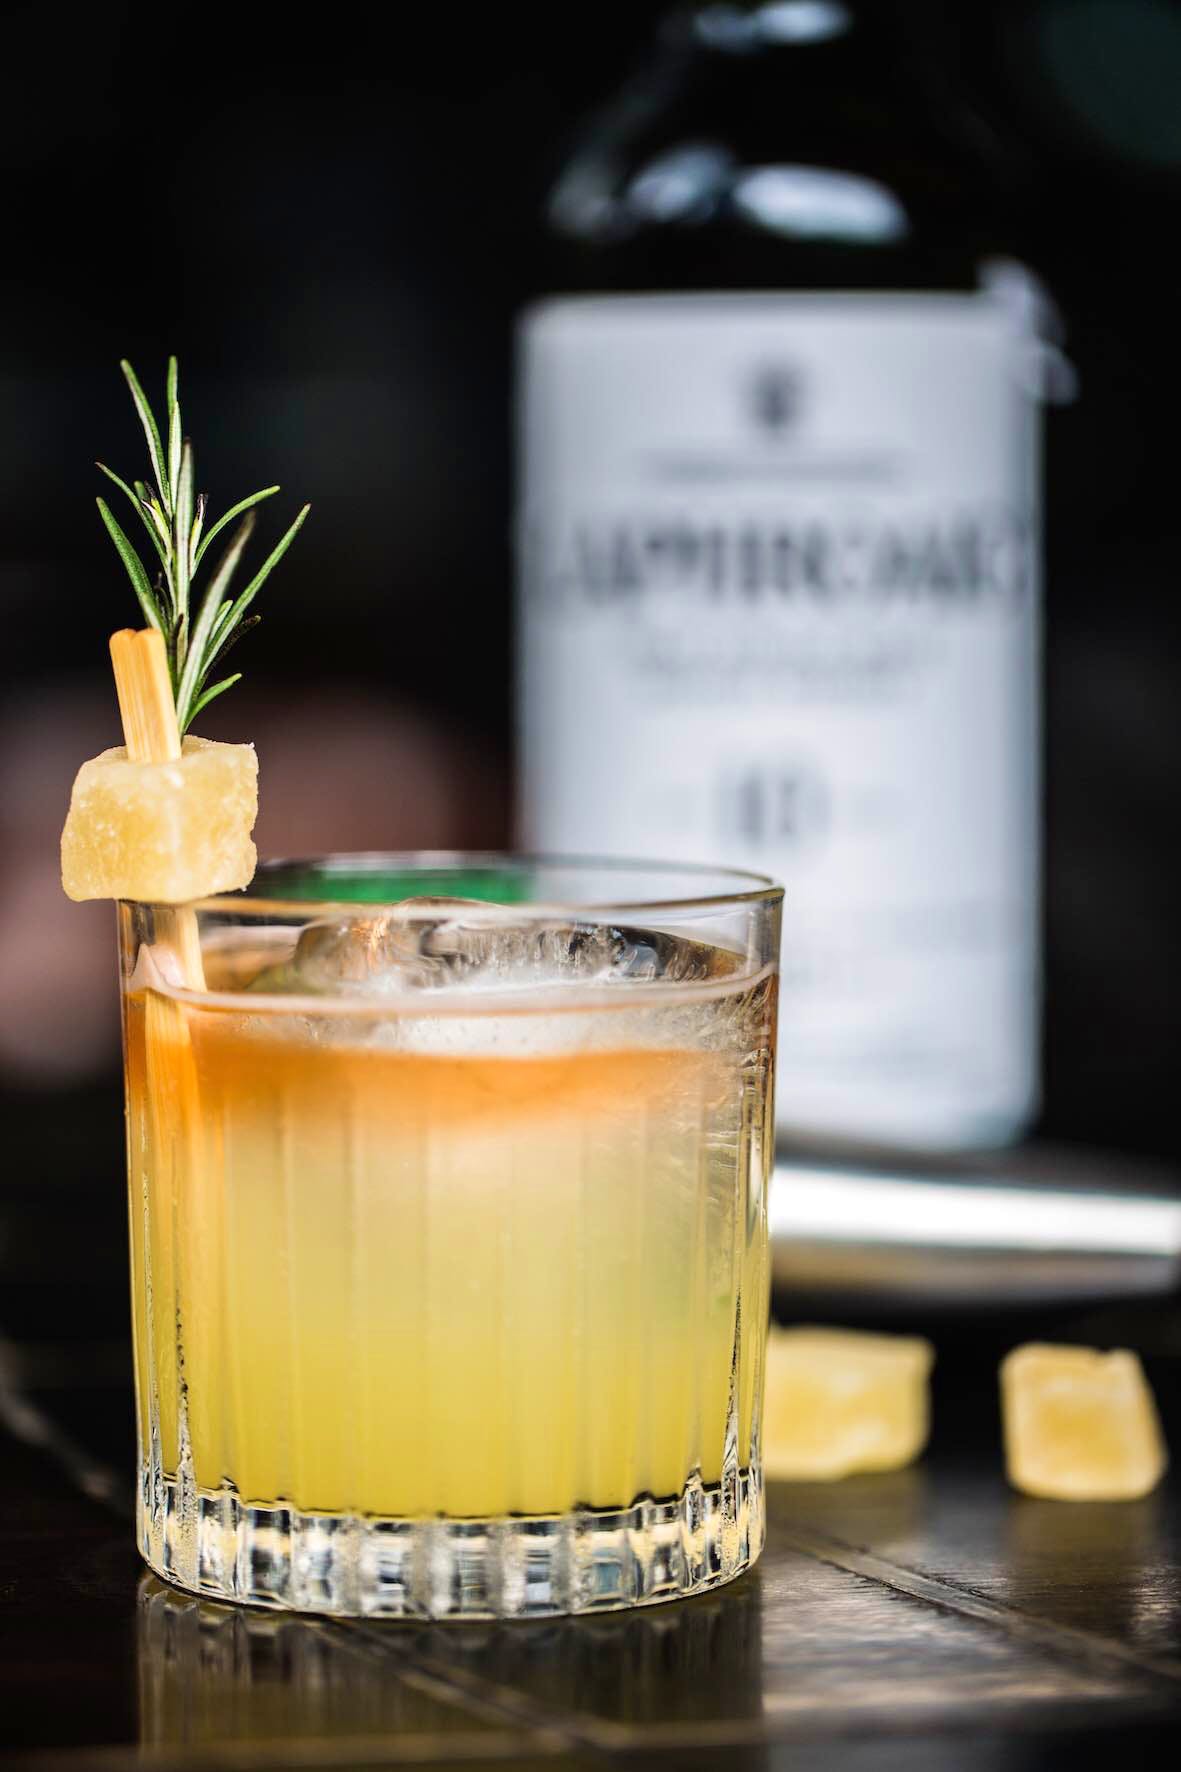 Drink,Classic cocktail,Alcoholic beverage,Distilled beverage,Whiskey sour,Sour,Cocktail,Greyhound,Paloma,Shrub